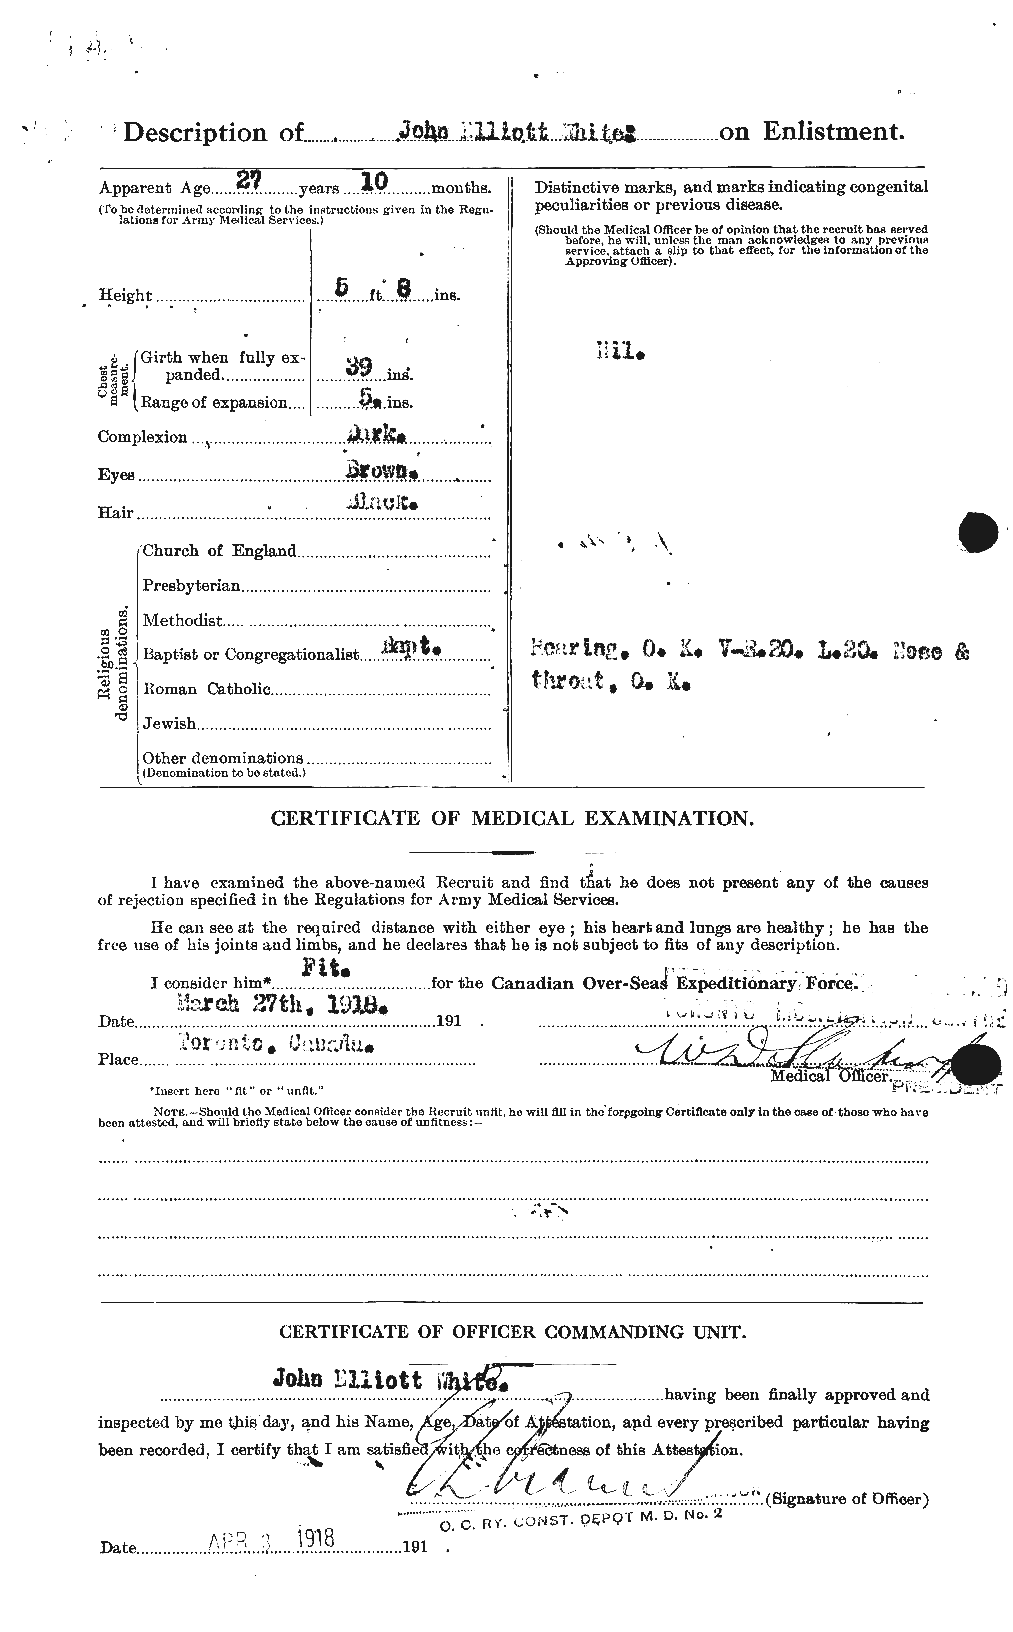 Personnel Records of the First World War - CEF 671554b